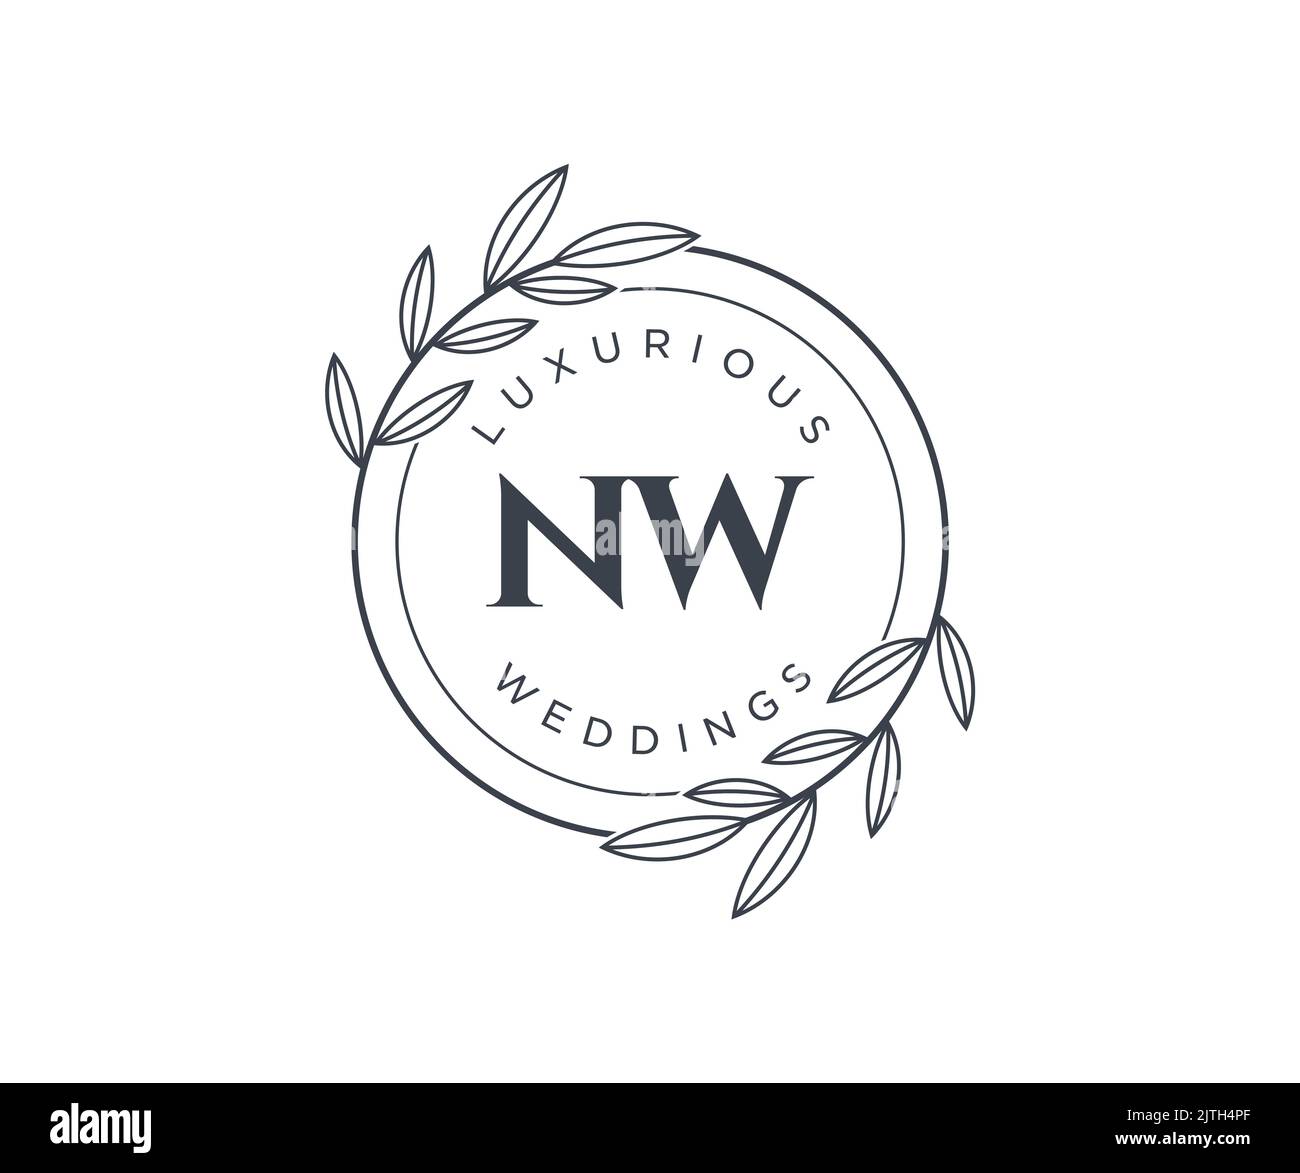 NW Initials letter Wedding monogram logos template, hand drawn modern minimalistic and floral templates for Invitation cards, Save the Date, elegant Stock Vector